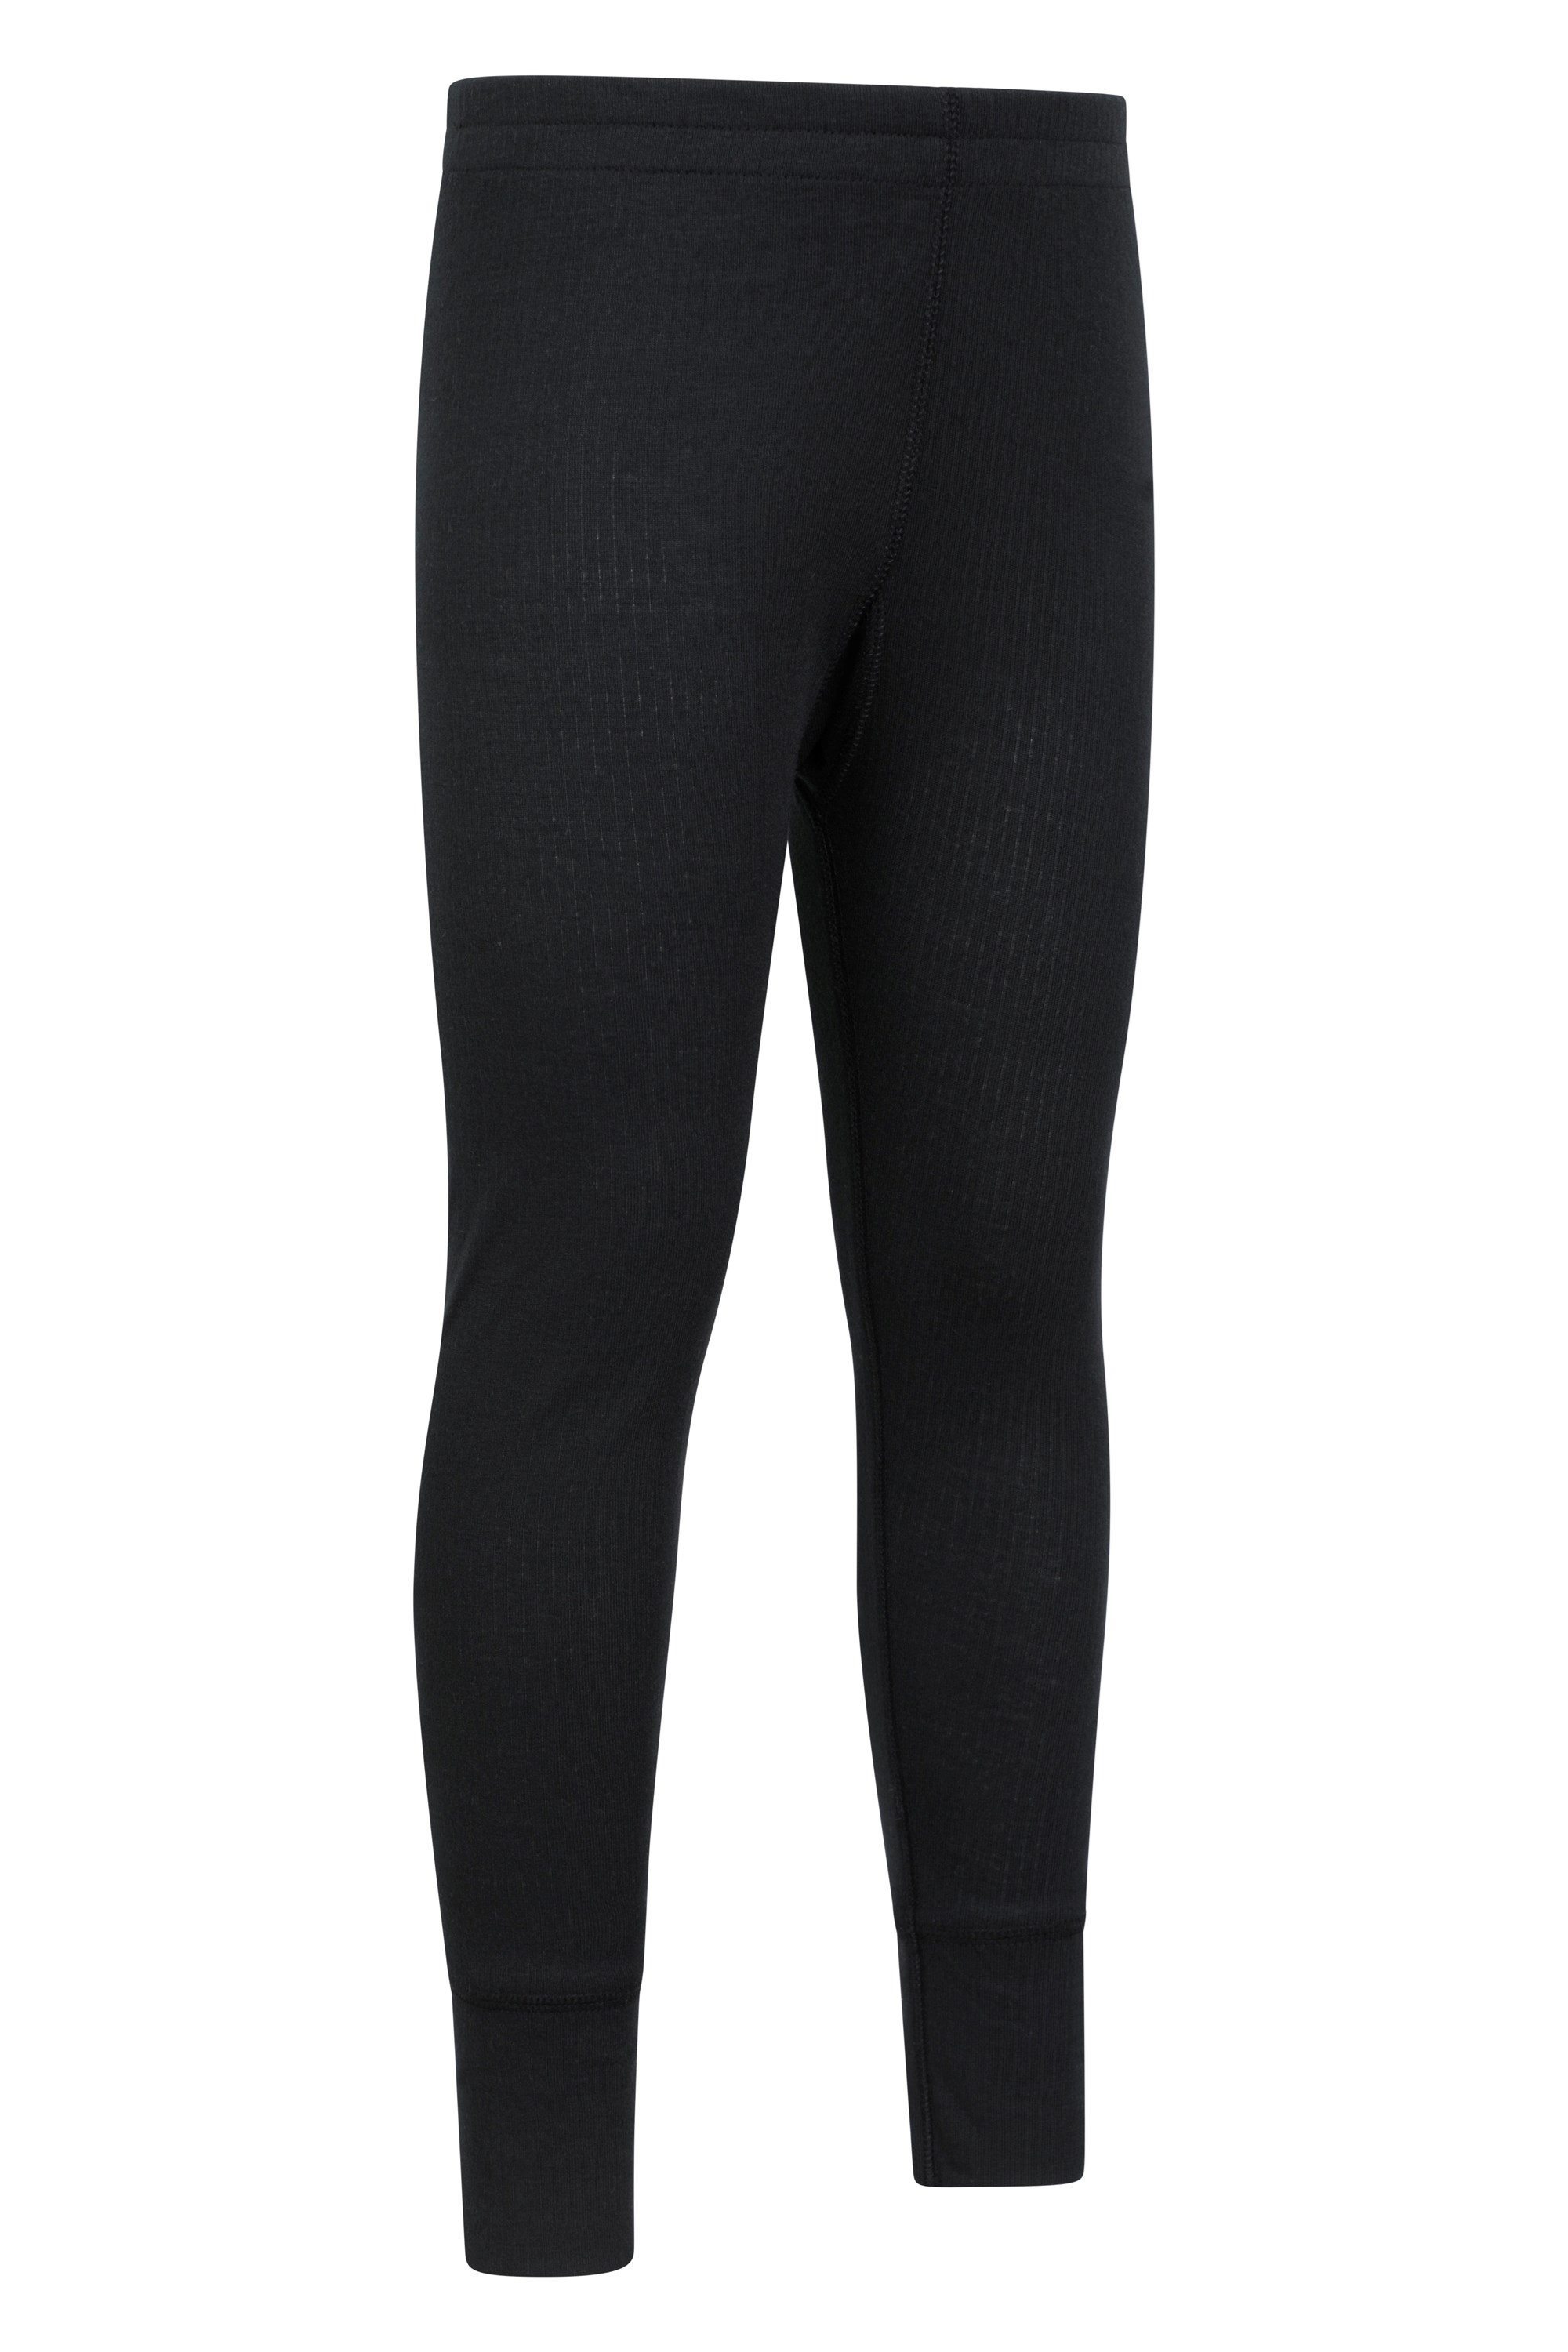 thermabod, thermabods, thermal, thermals, long john, long johns, legging,  leggings, kids, thermals - The Scout Shop